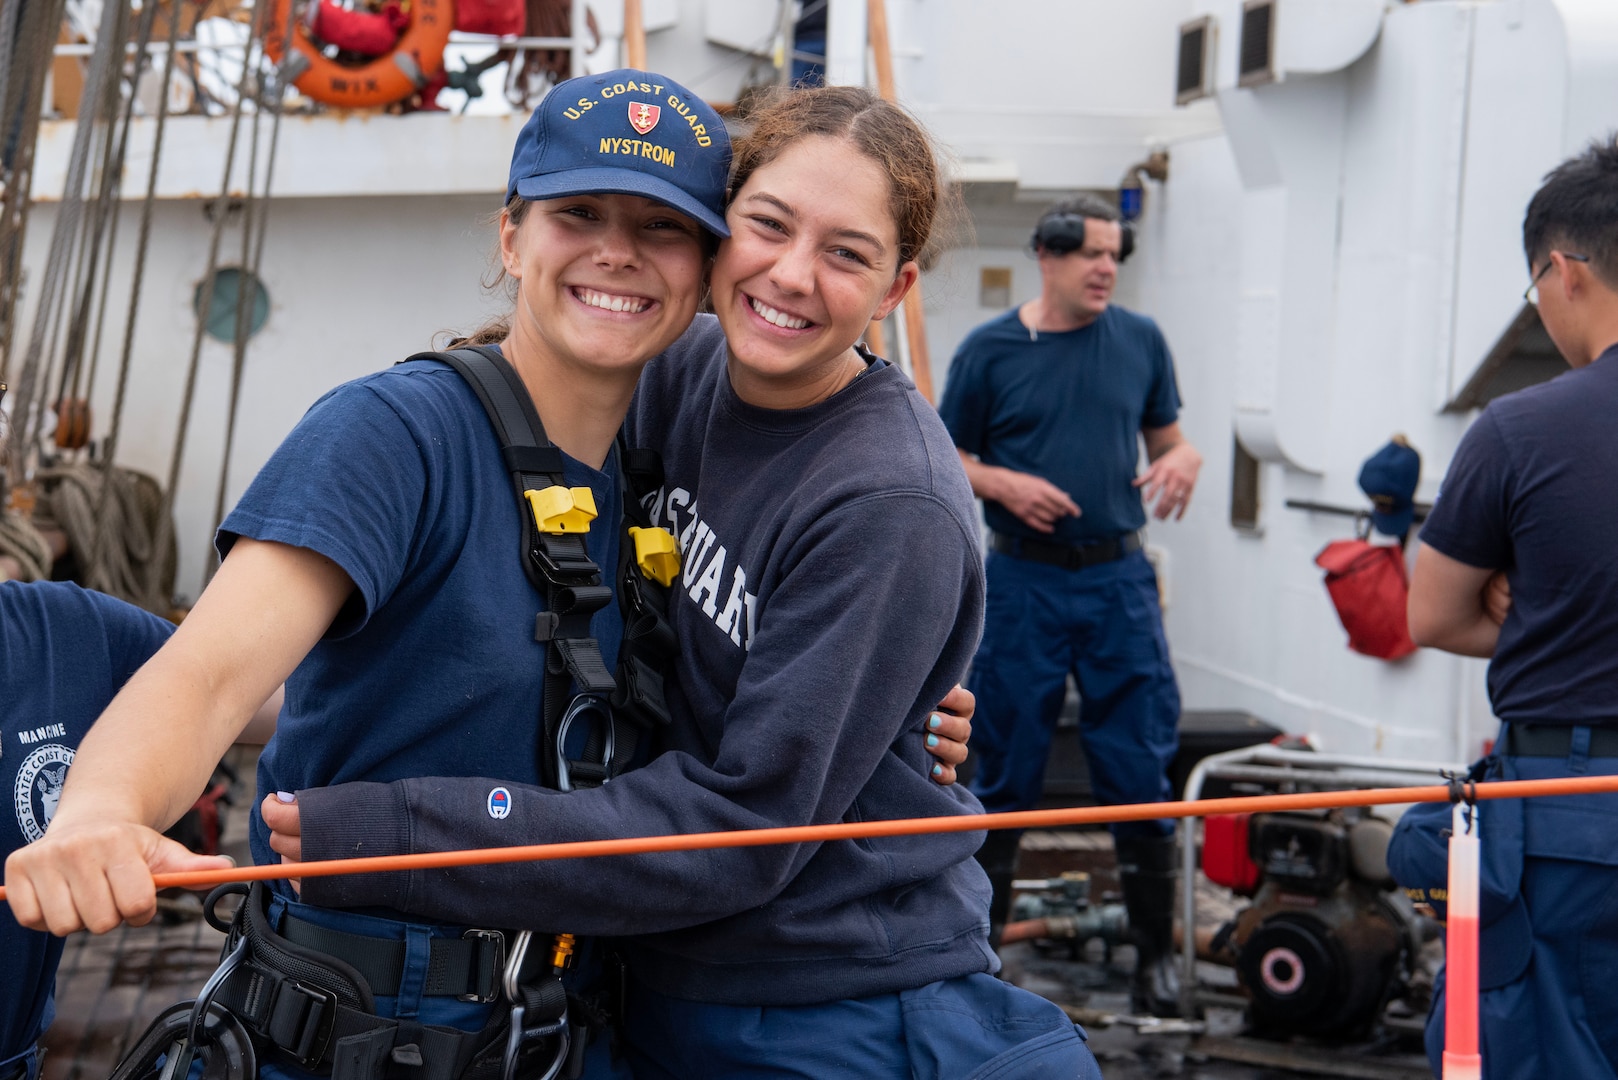 Coast Guard Academy Cadets Allison Nystrom and Laila Baameaur smile after completing a damage control exercise held on board USCGC Eagle (WIX 327), June 29, 2023, while underway in the Atlantic Ocean. Eagle, originally operated by the pre-World War II German navy and later taken as a war reparation by the United States, is now a training ship where U.S. Coast Guard cadets and officer candidates learn leadership and practical seamanship skills. (U.S. Coast Guard photo by Petty Officer 3rd Class Carmen Caver)